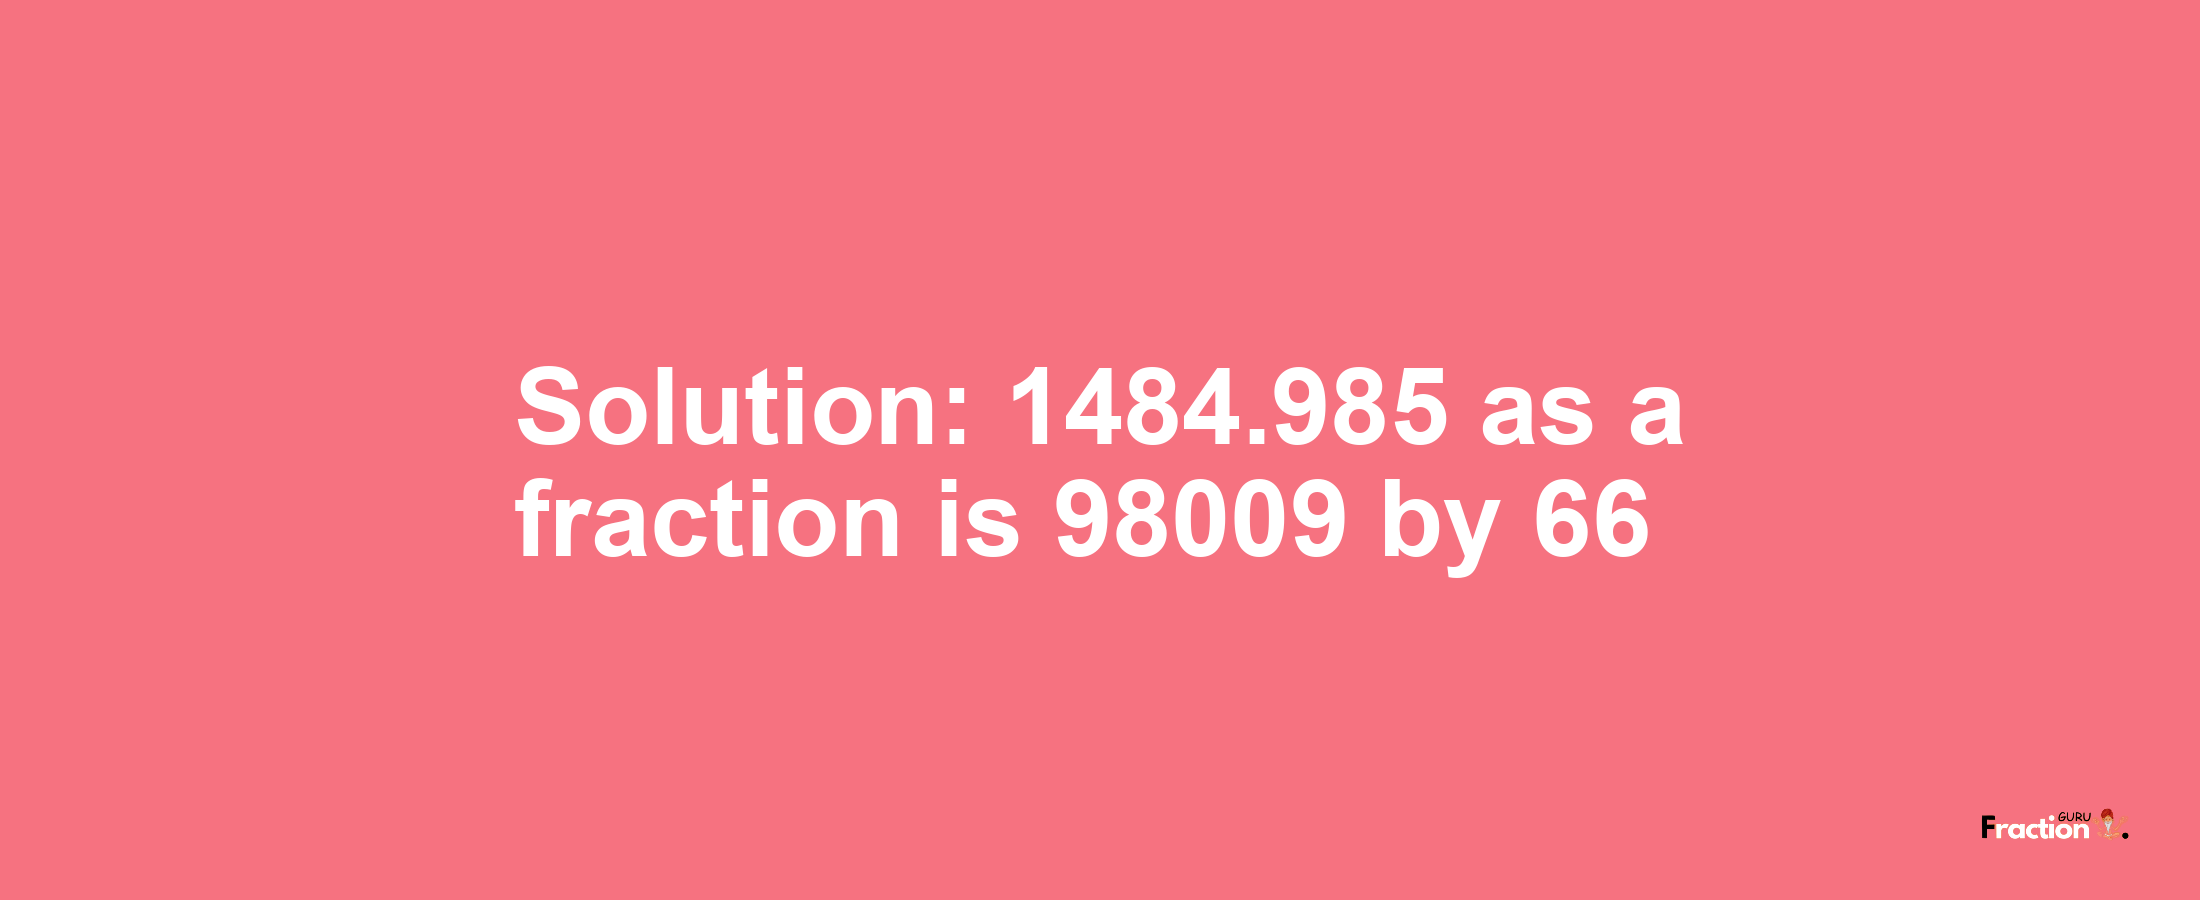 Solution:1484.985 as a fraction is 98009/66